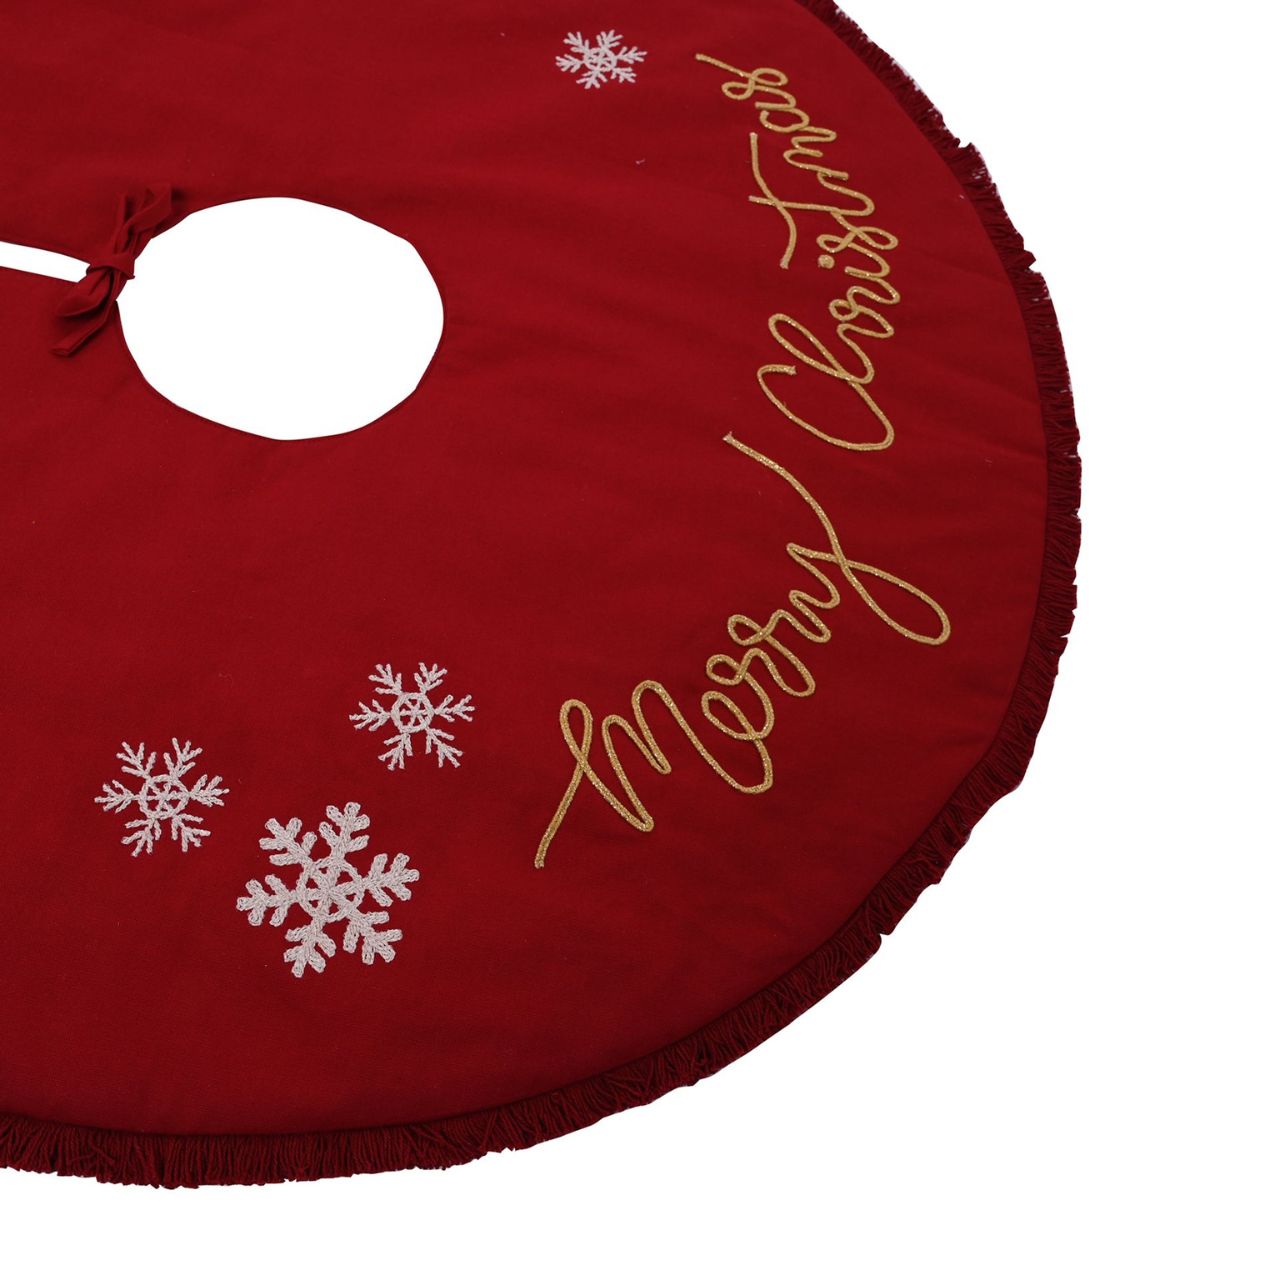 Red Christmas Tree Skirt Hand Embellished Merry Christmas  A Merry Christmas hand embellished red tree skirt from THE SEASONAL GIFT CO.  This standout accessory wraps itself around Christmas trees to accentuate its decoration.